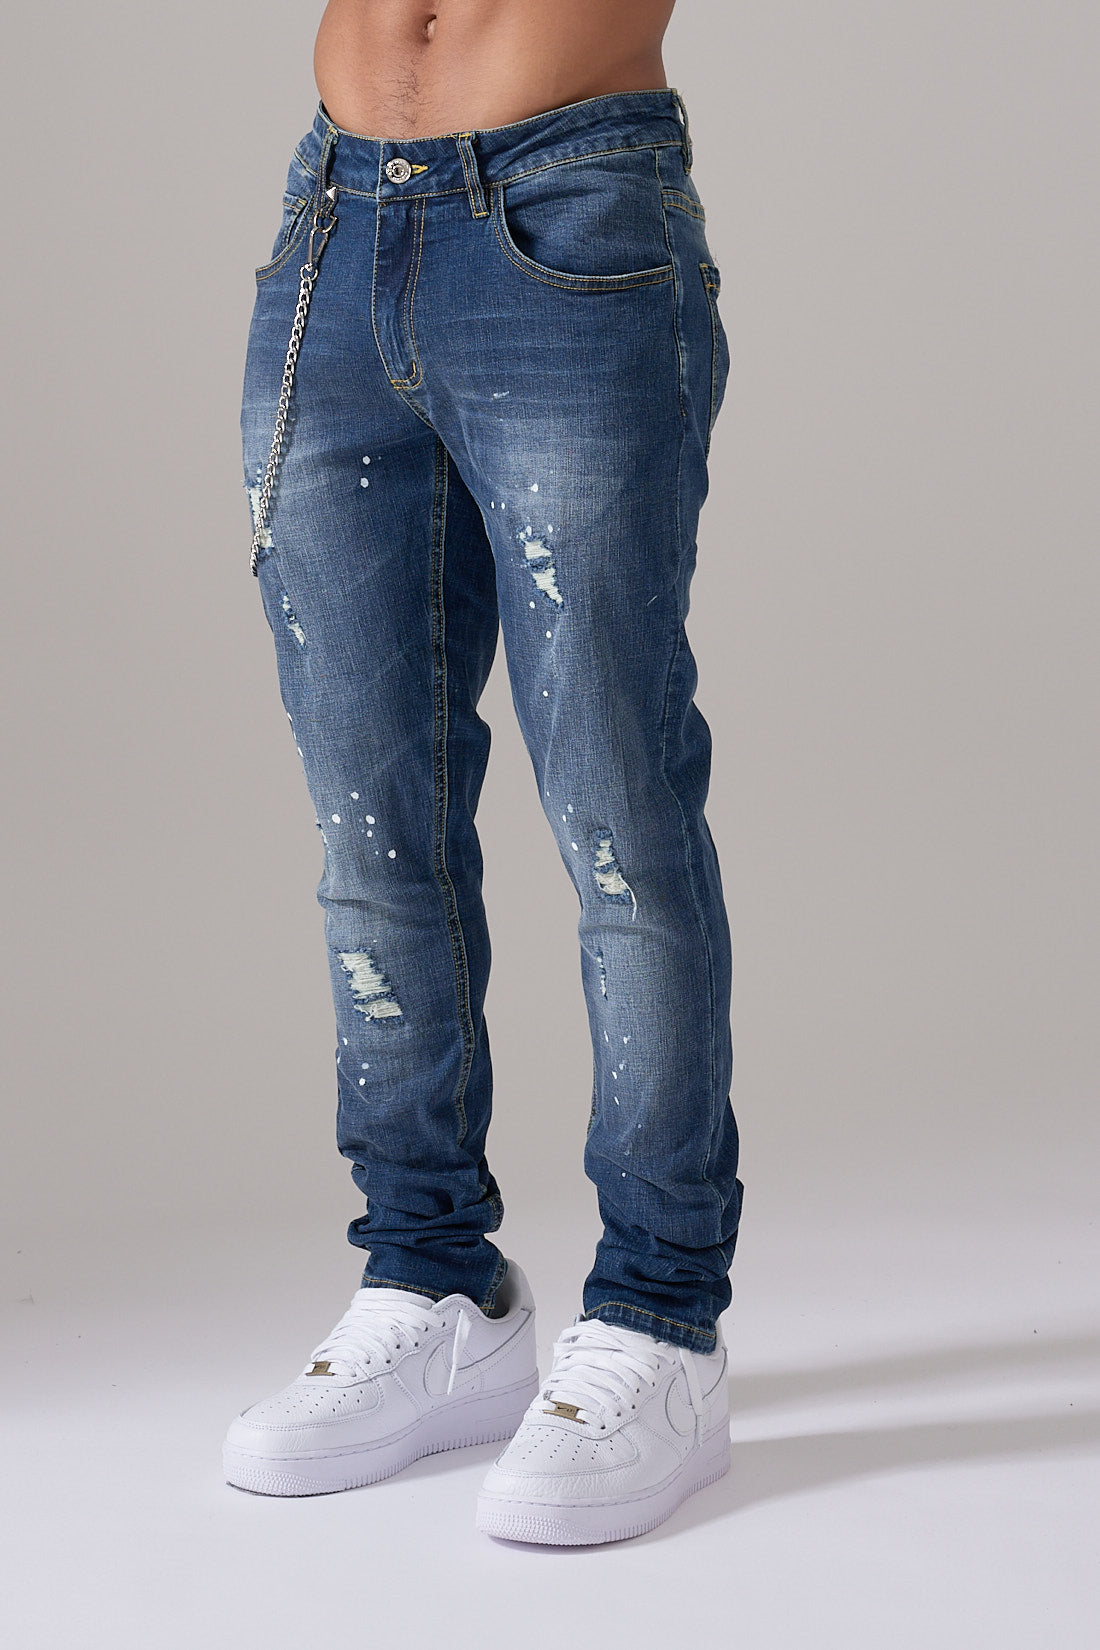 WASHED SPLASH PAINT BLUE RIPPED DENIM JEANS WITH METAL PLAQUE